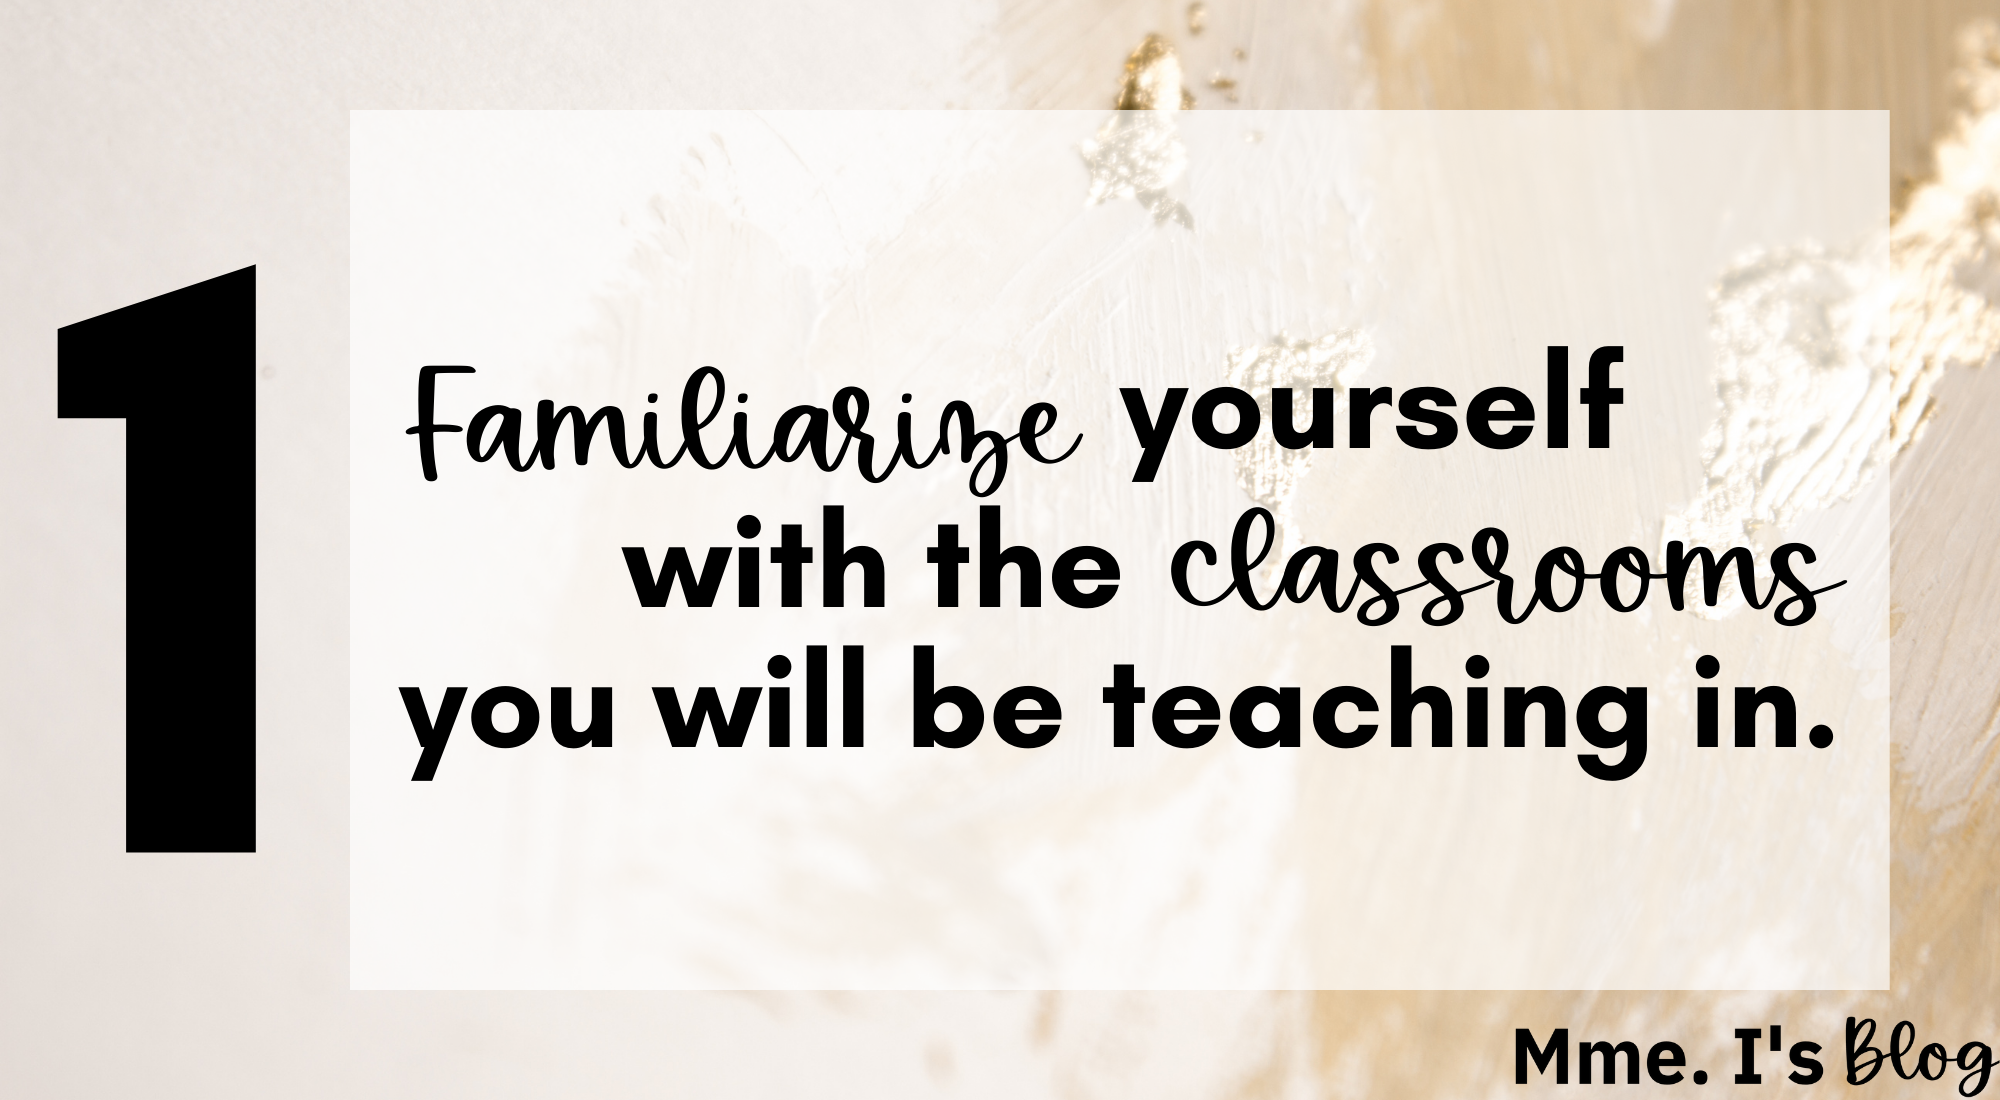 Familiarize yourself with the classrooms you will be teaching in.